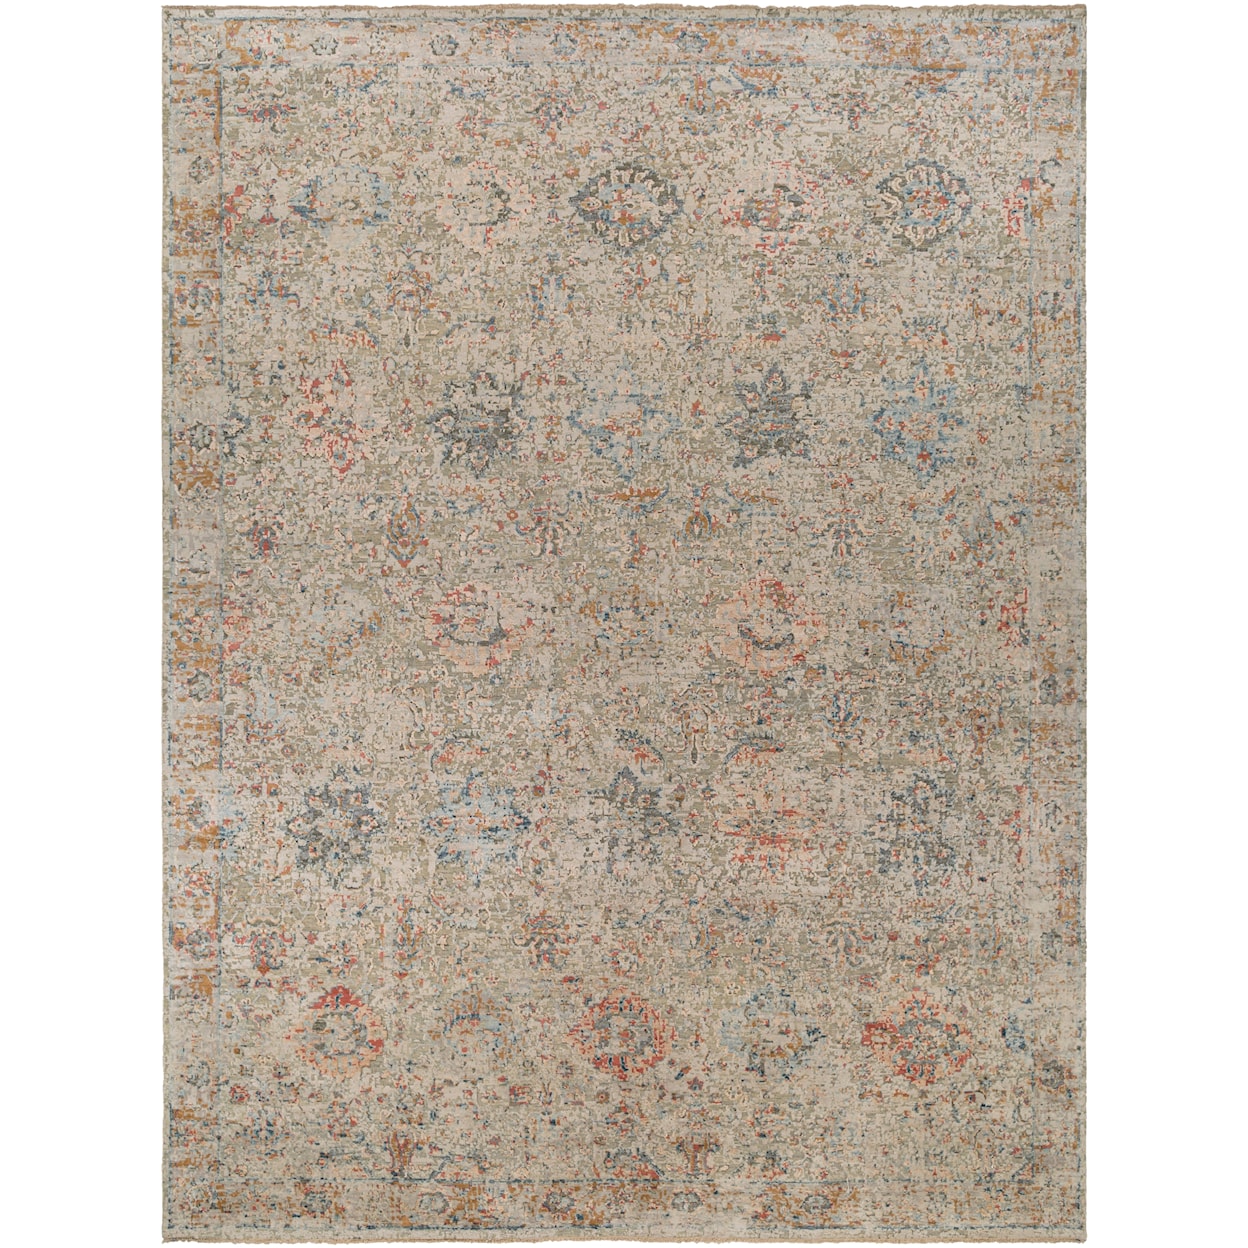 Ruby-Gordon Accents Piccadilly Rugs